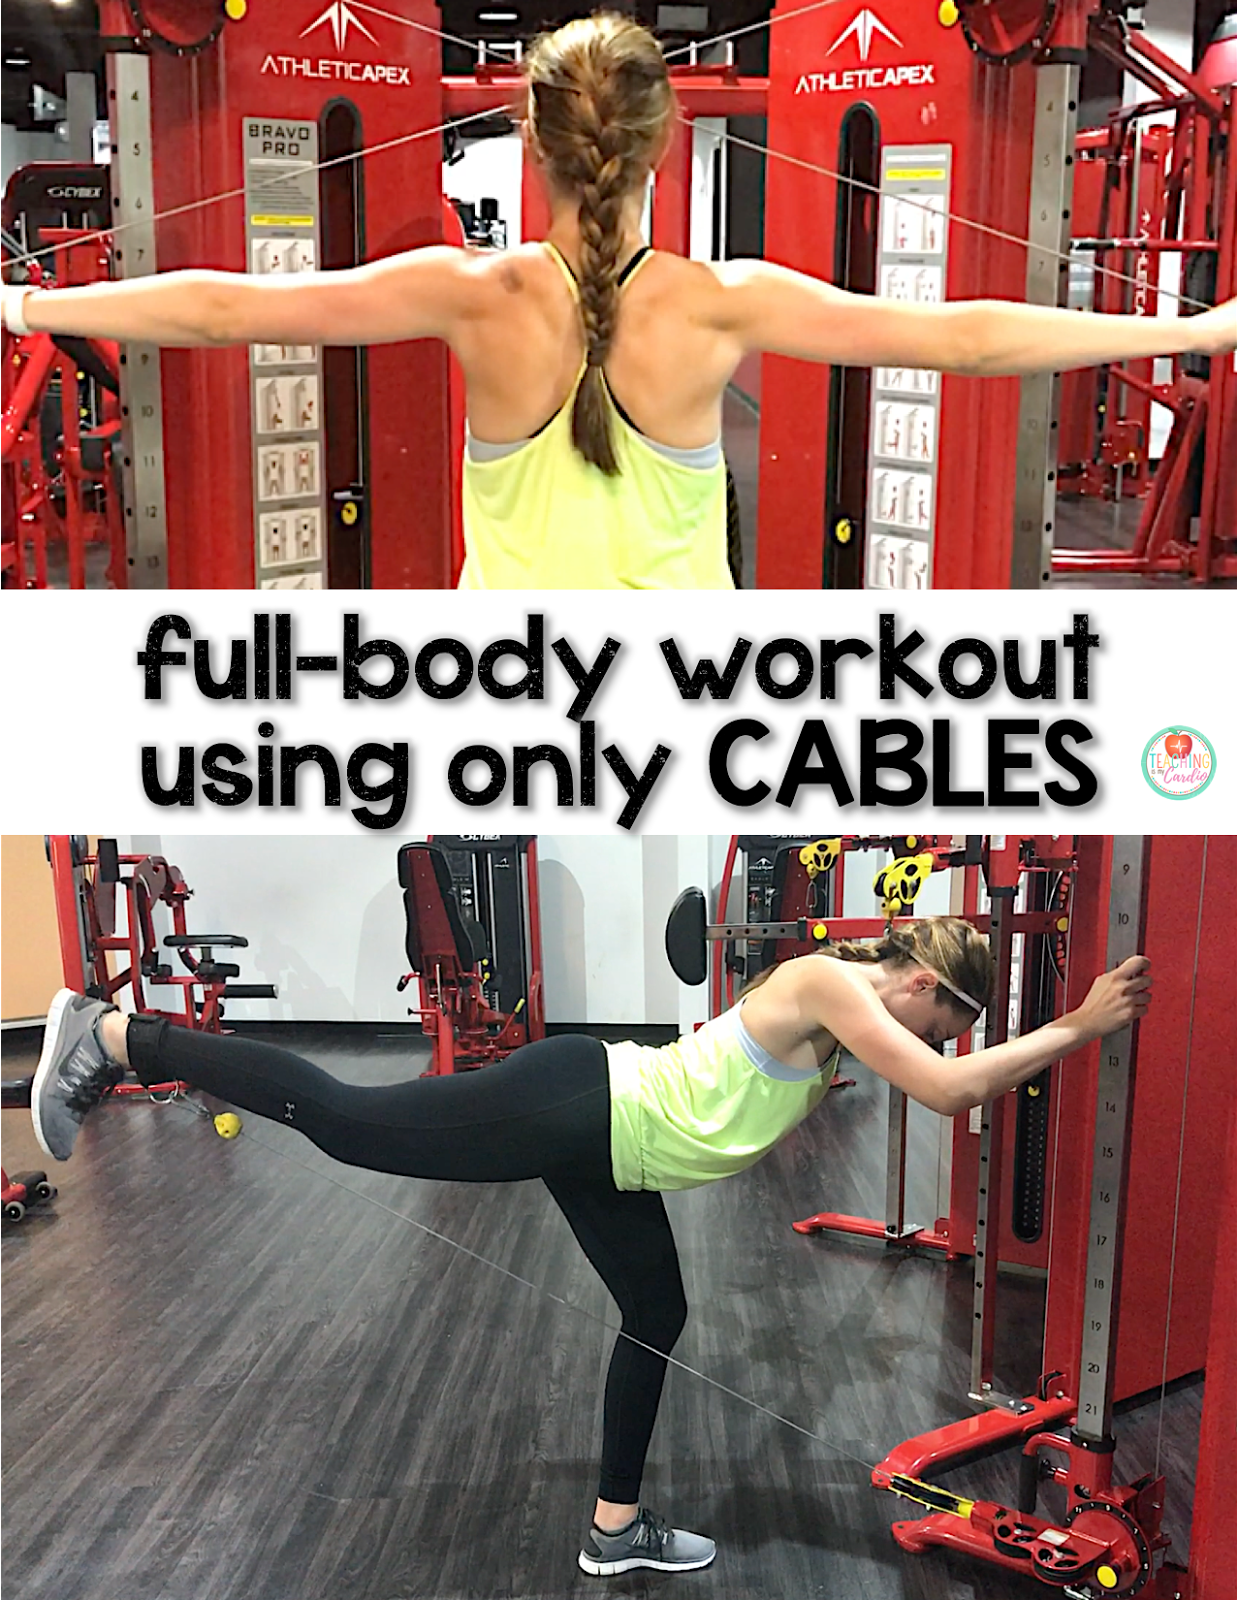 15 Minute Cable Machine Workouts For Legs for push your ABS